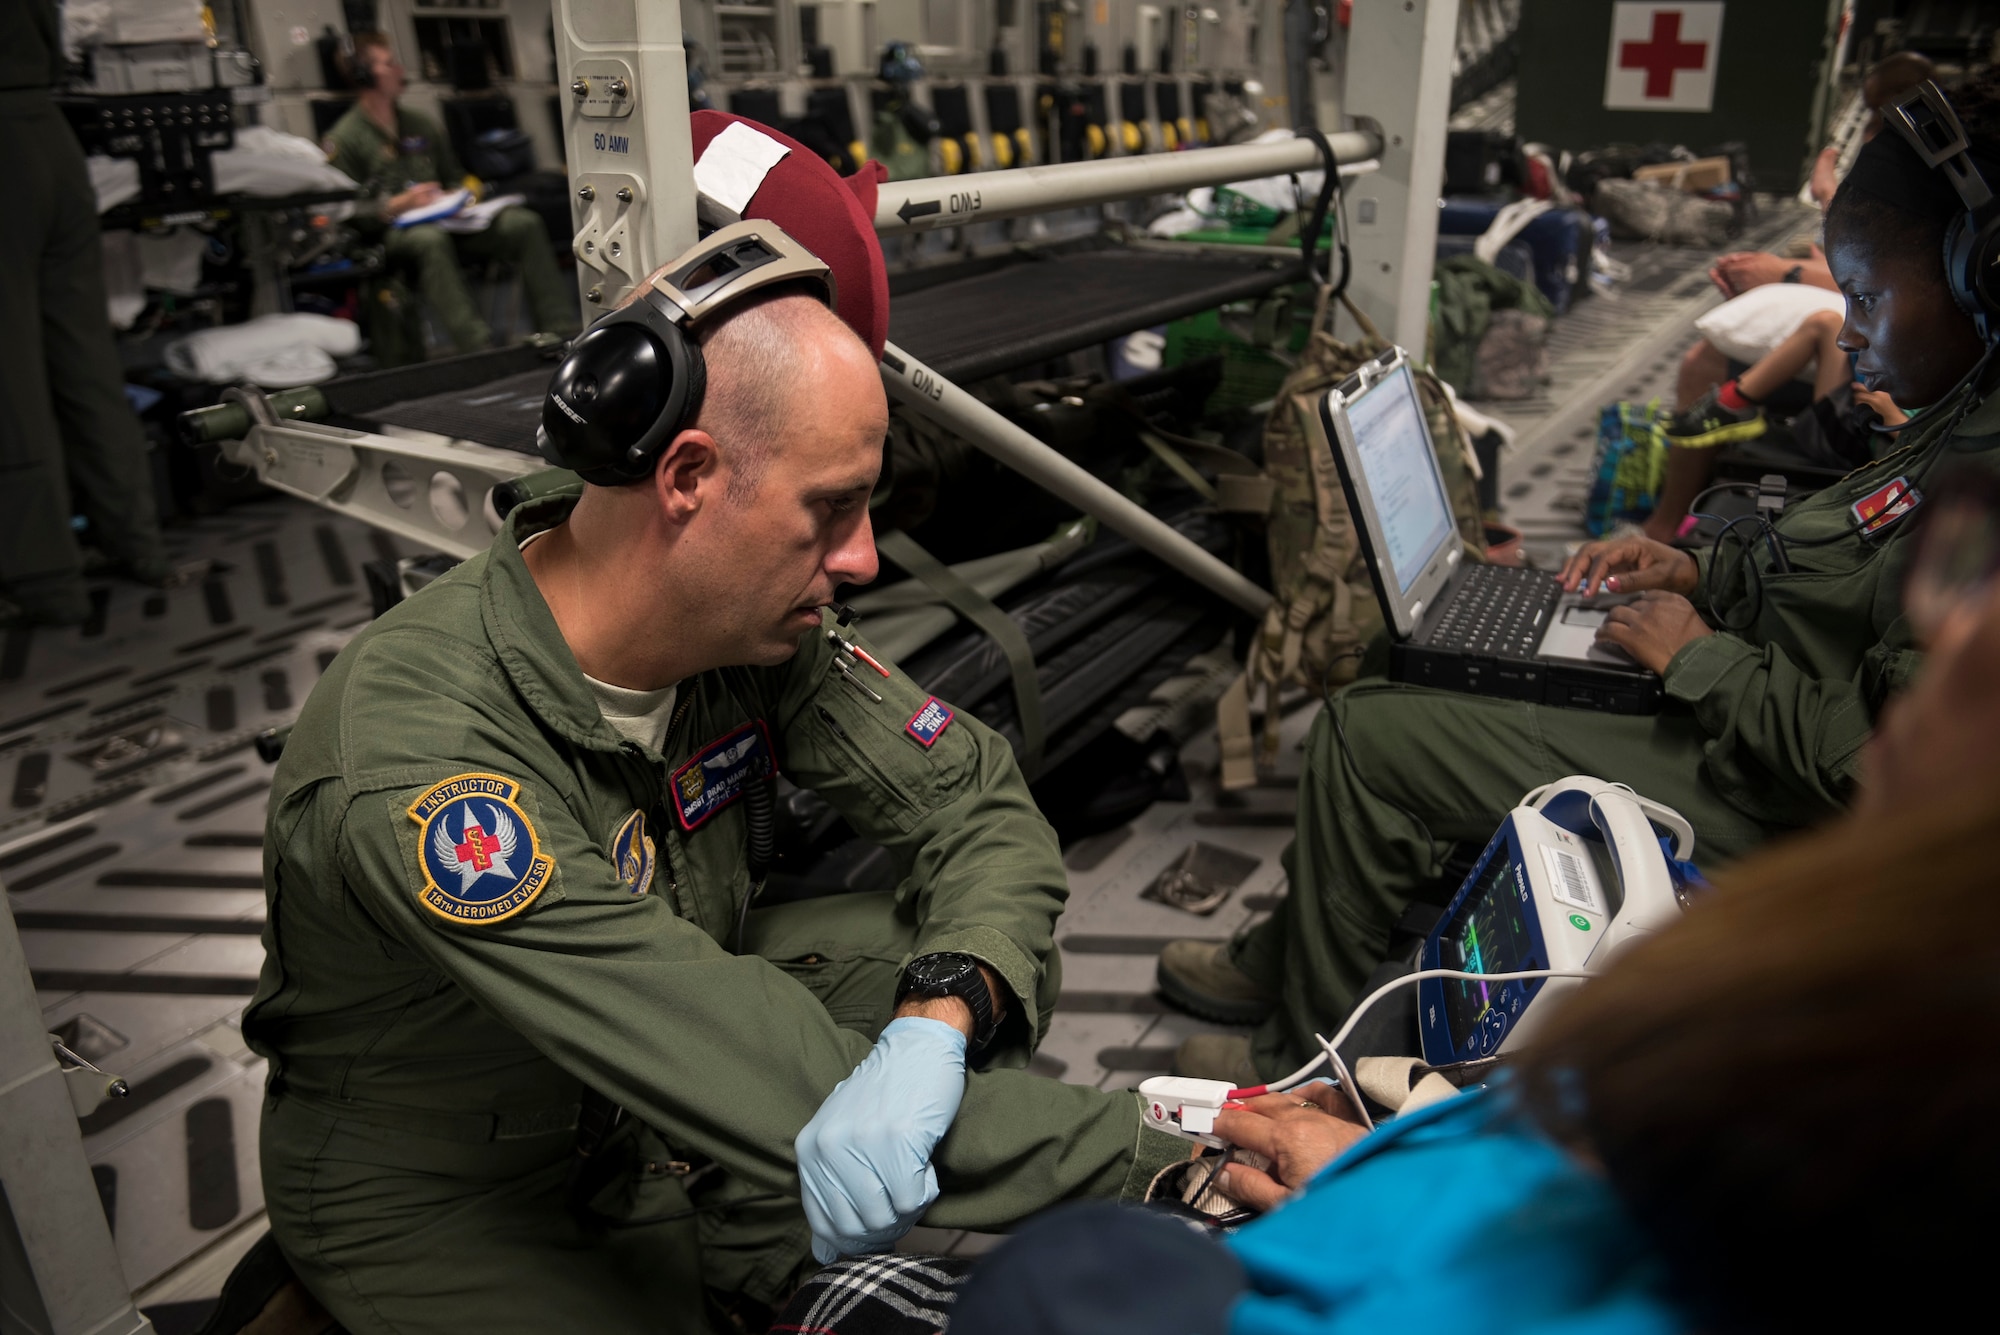 Senior Master Sgt. Brad Markwood, 18th Aeromedical Evacuation Squadron 2nd AE technician, checks the vitals of a patient on board a C-17 Globemaster III from Travis Air Force Base, Calif., May 16, 2018, at Anderson Air Force Base, Guam. AE teams provide and sustain critical care in the air for military members and their families as they travel to follow-on medical treatment facilities for medical care. (U.S. Air Force photo by Lan Kim)